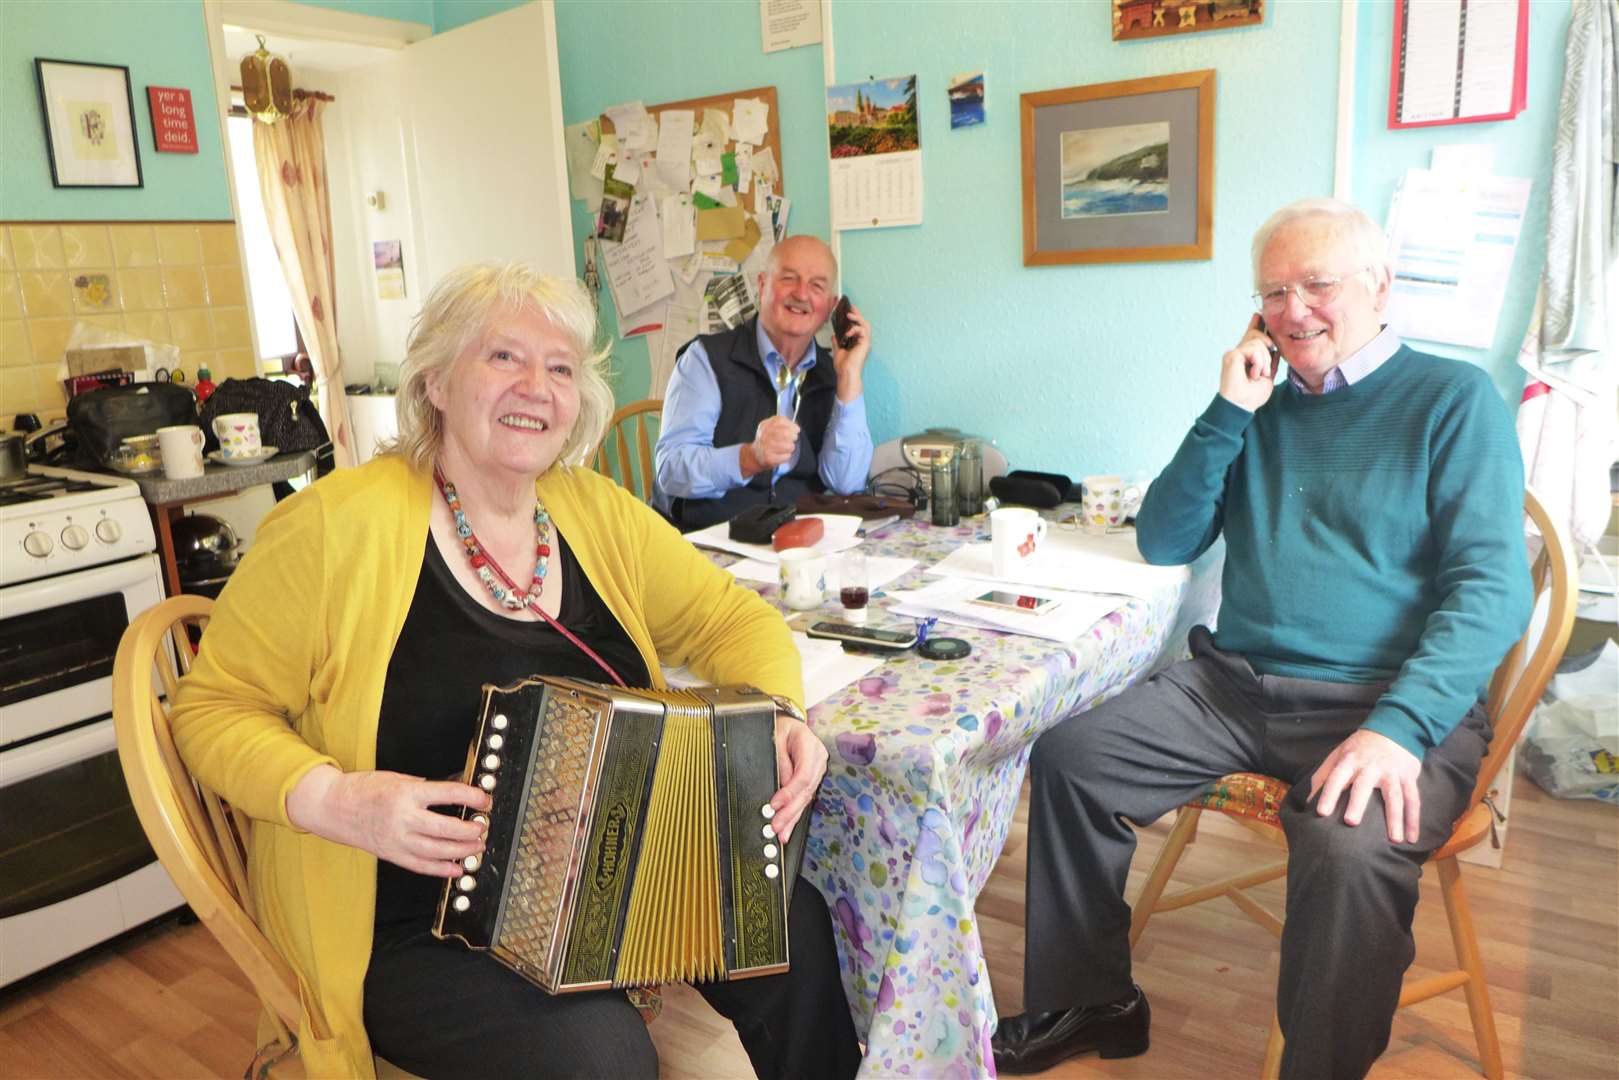 Nancy Nicolson and Eric Farquhar with Willie Mackay looking on at the kitchen ceilidh.